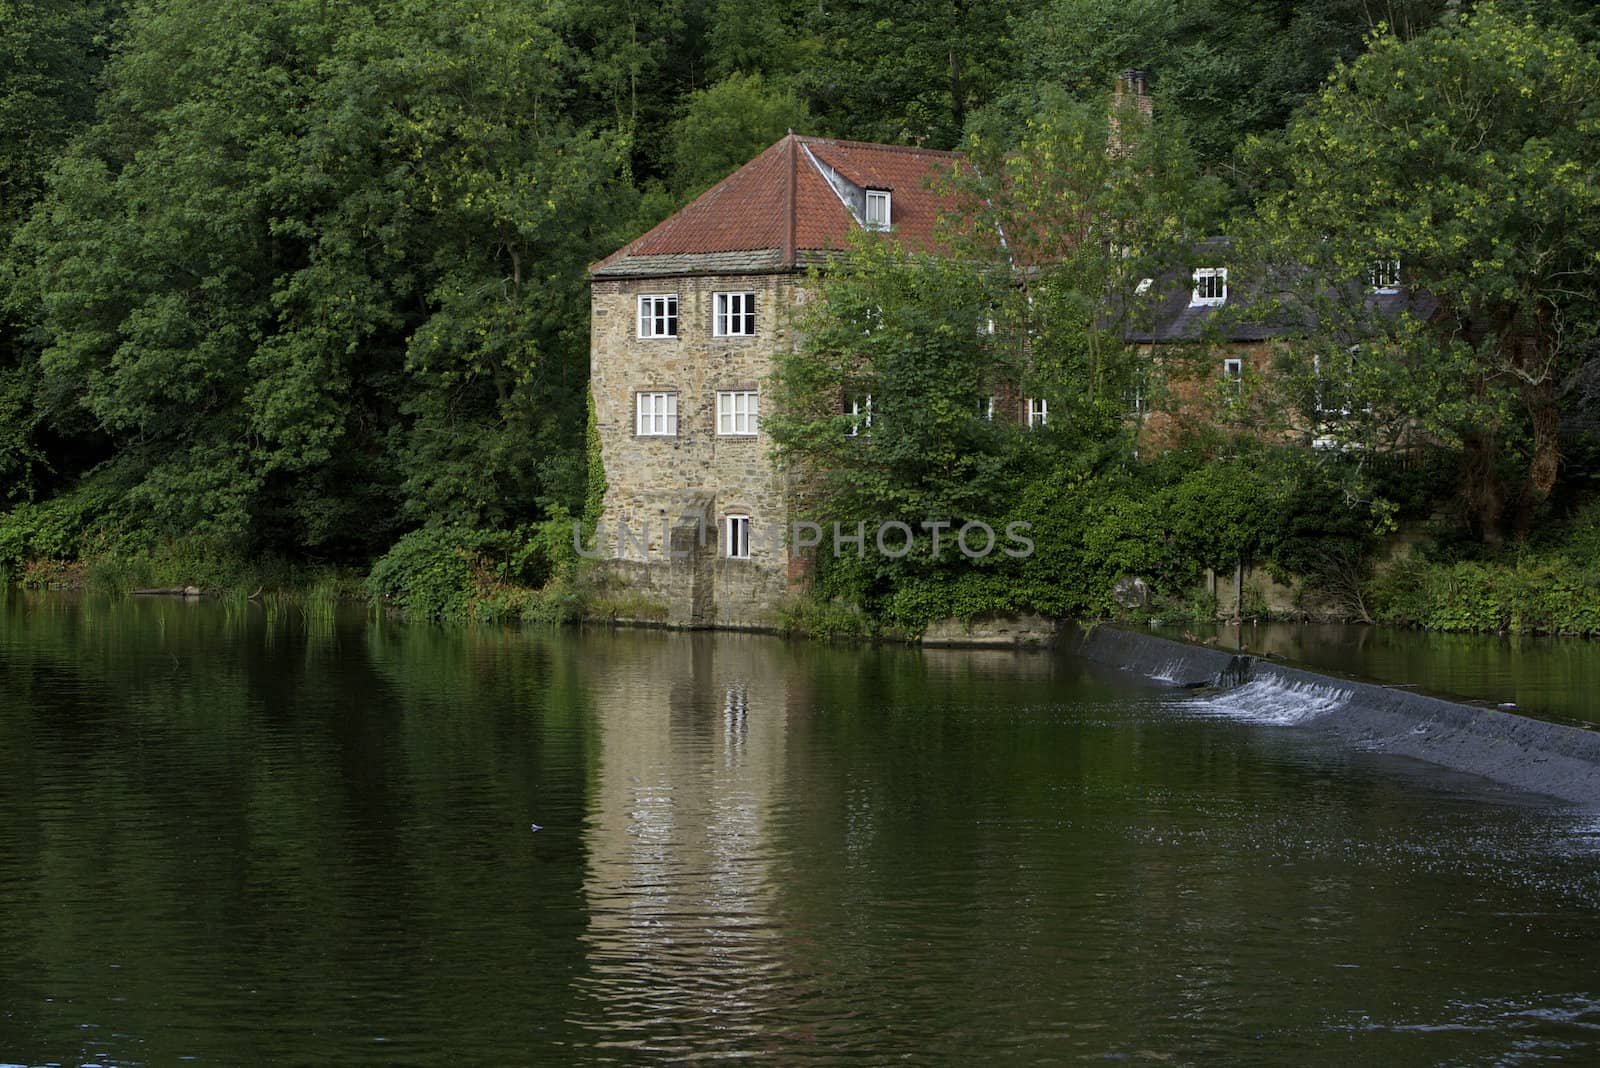 Historic old pump house on river banks in England